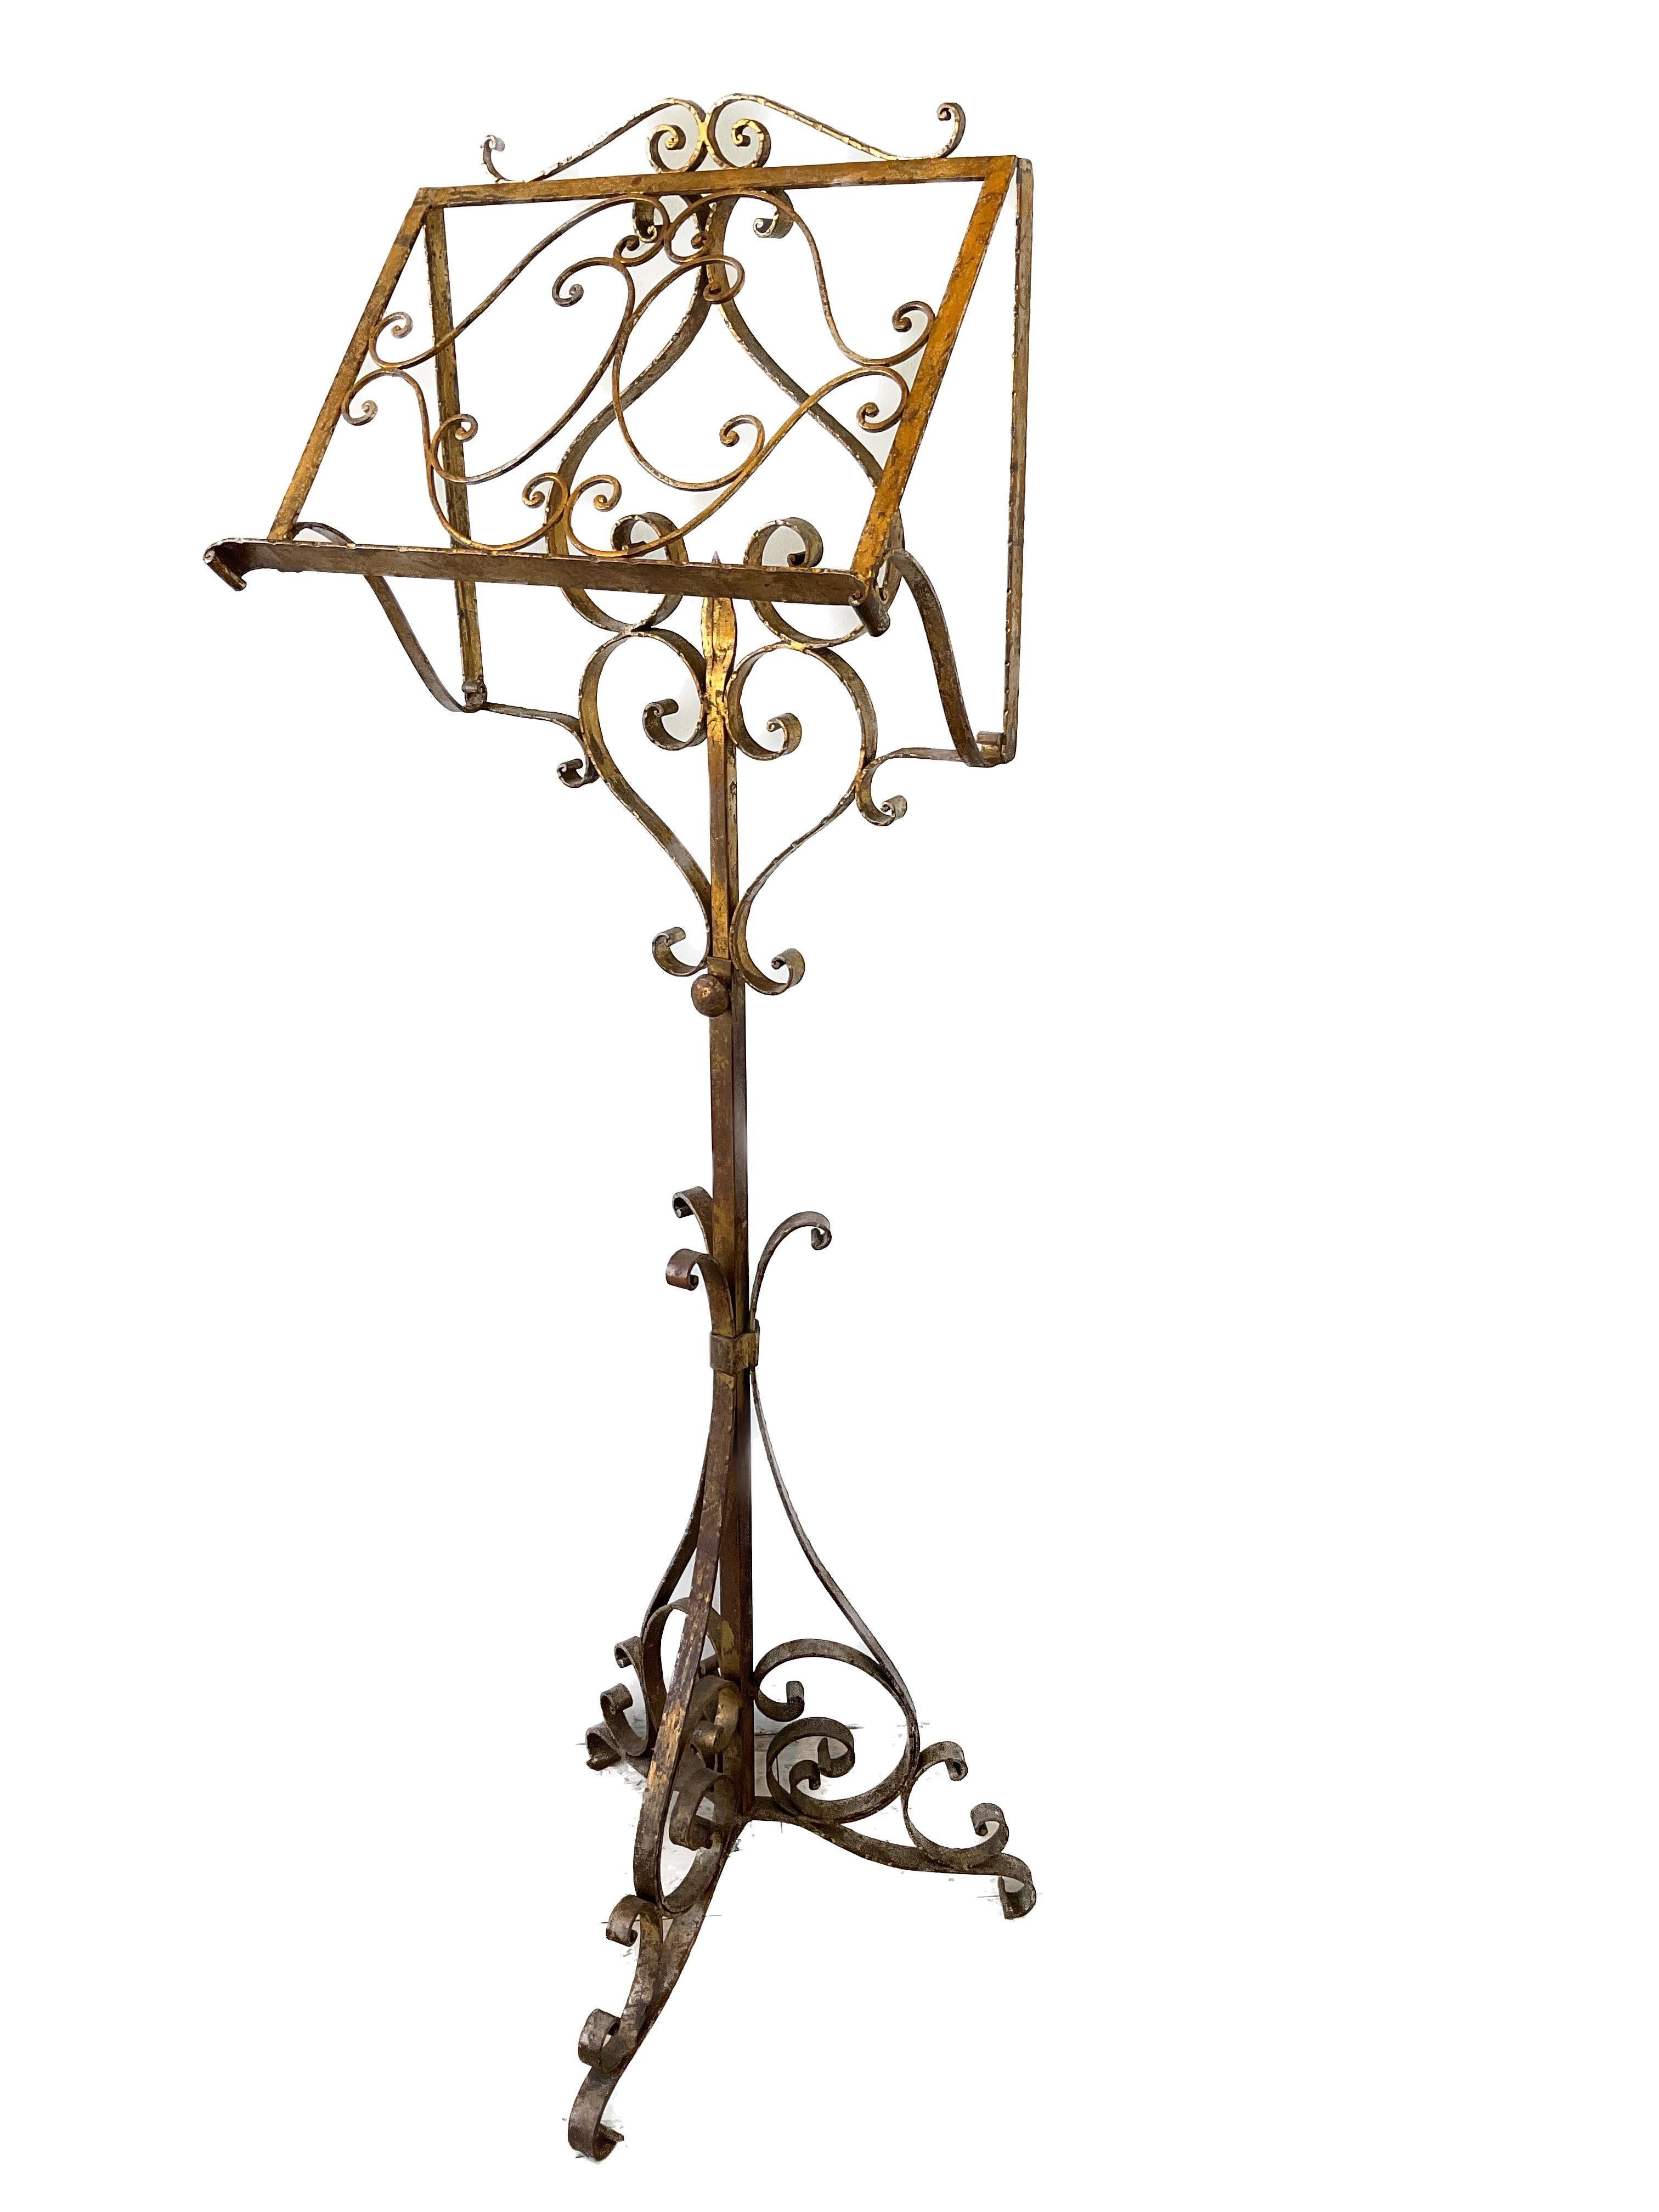 1960s Italian Gilt Iron Music Stand In Good Condition For Sale In Tarrytown, NY